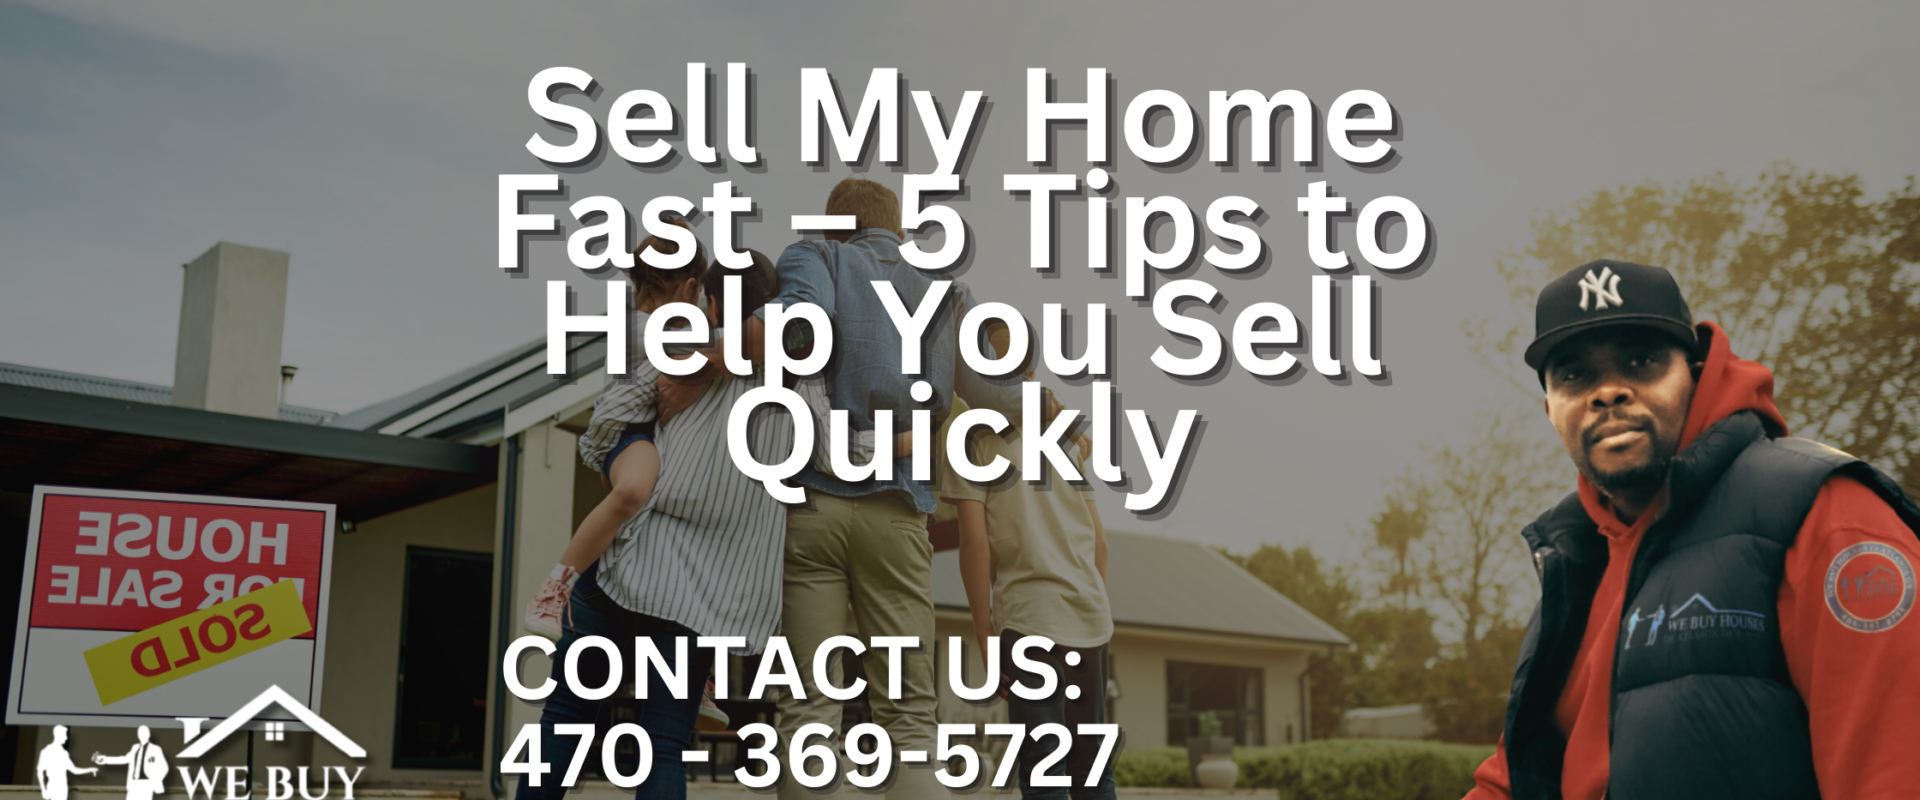 Sell-My-Home-Fast-–-5-Tips-to-Help-You-Sell-Quickly